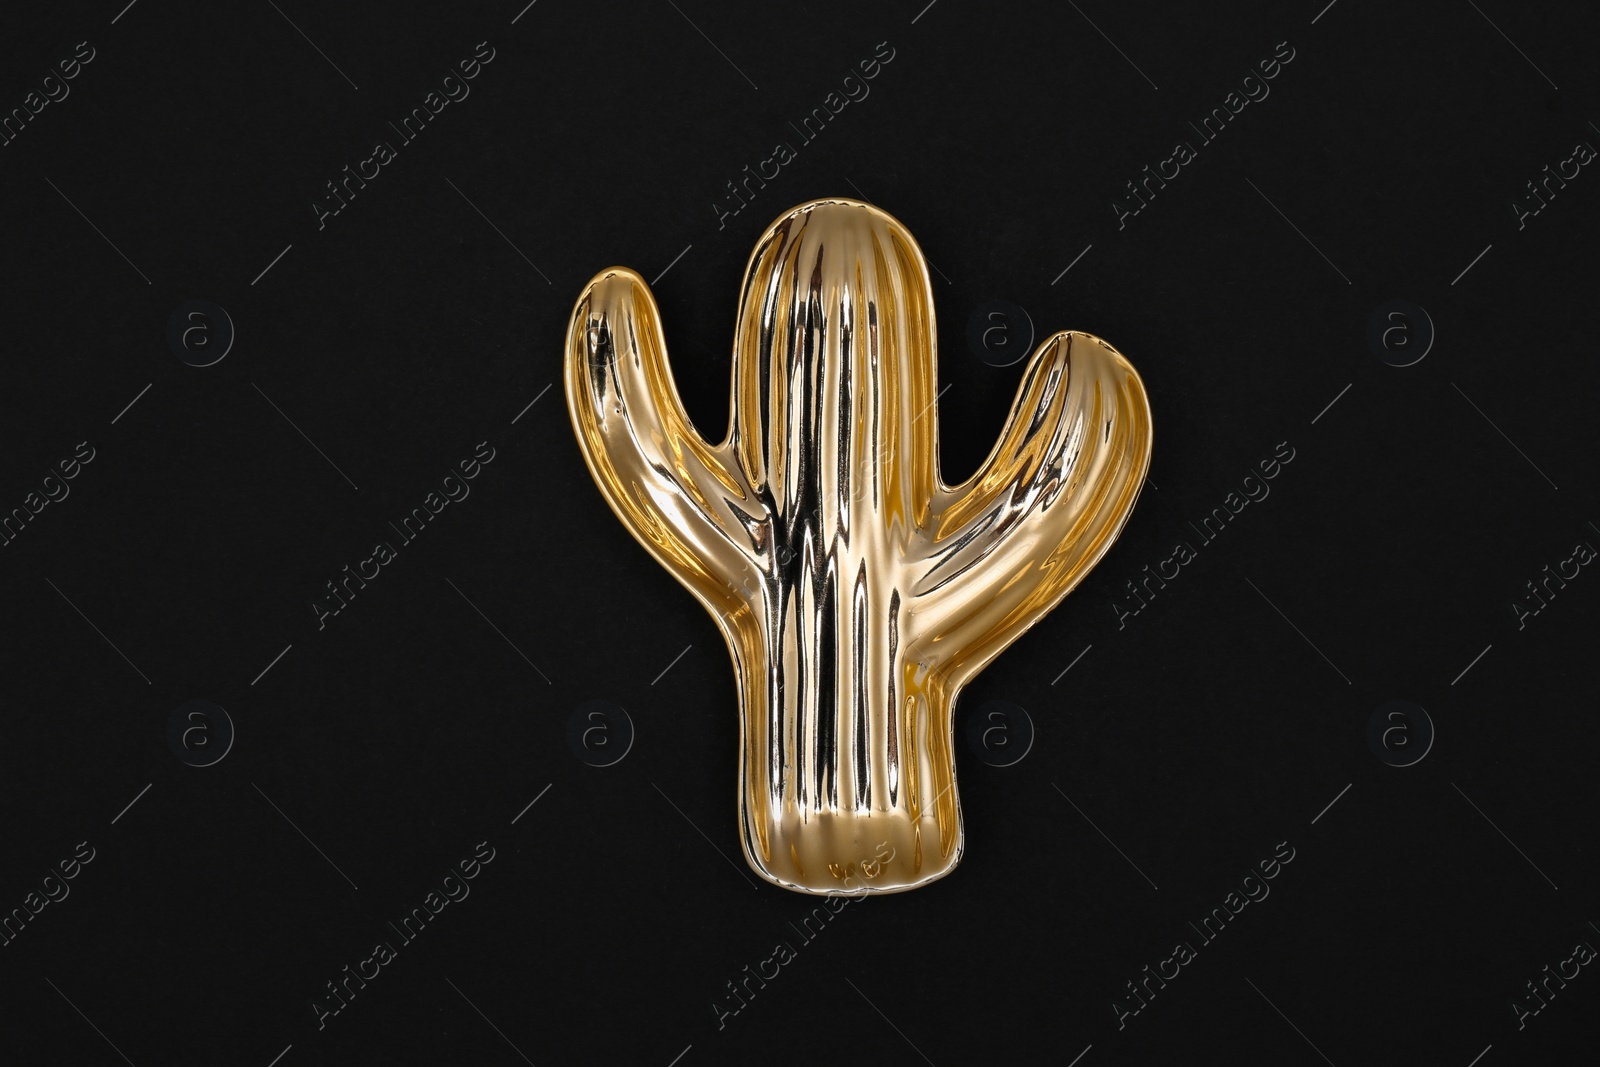 Photo of Gold cactus shaped bowl on black background, top view